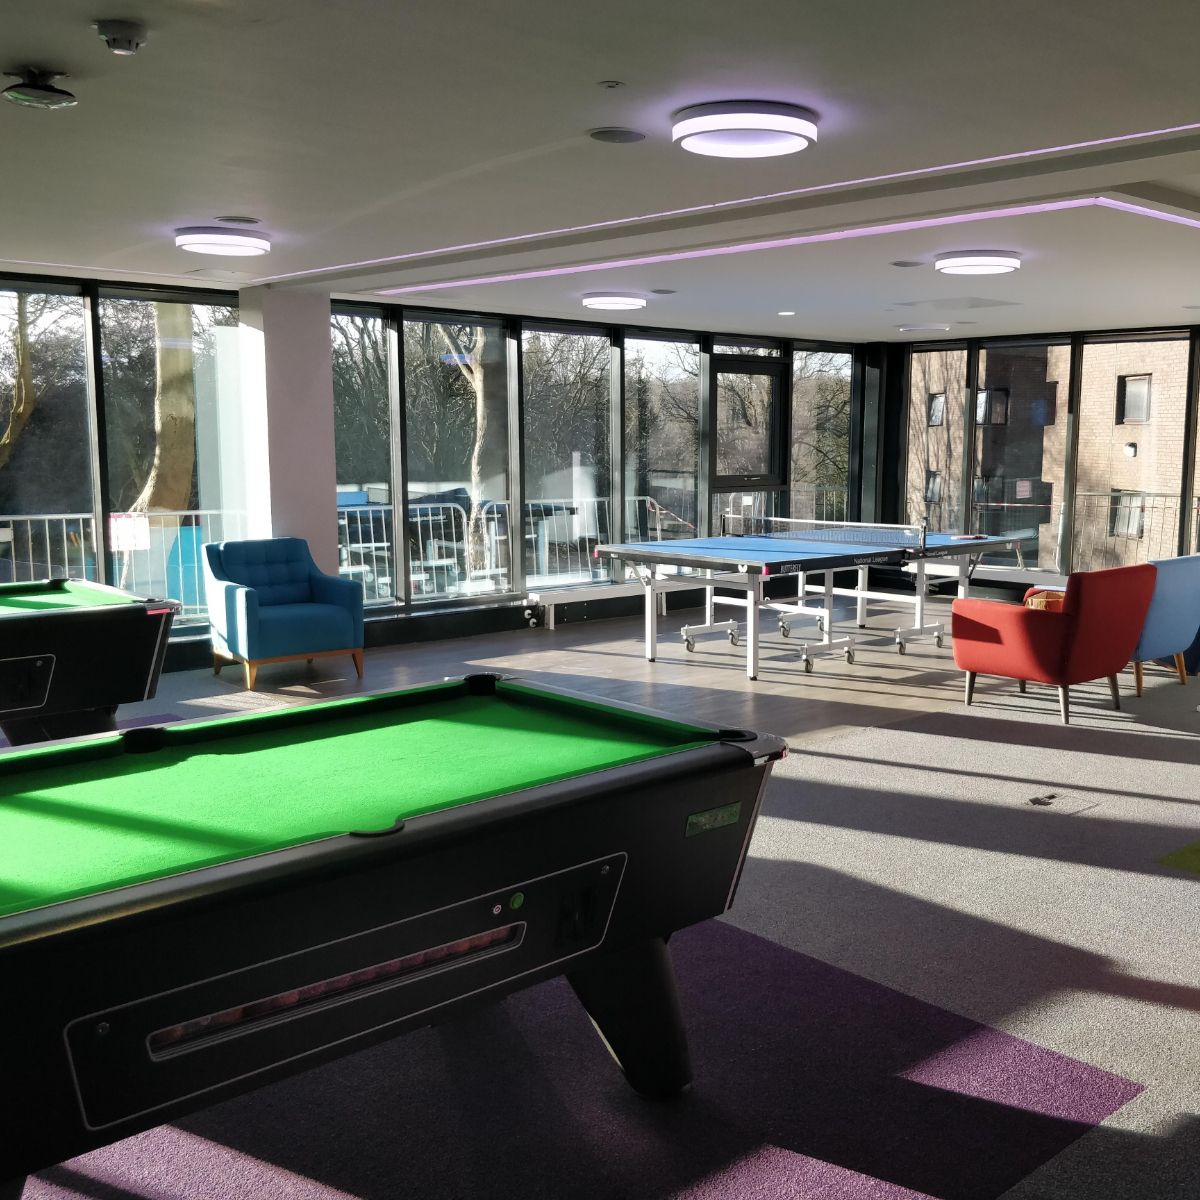 Pool table in the Junior Common Room